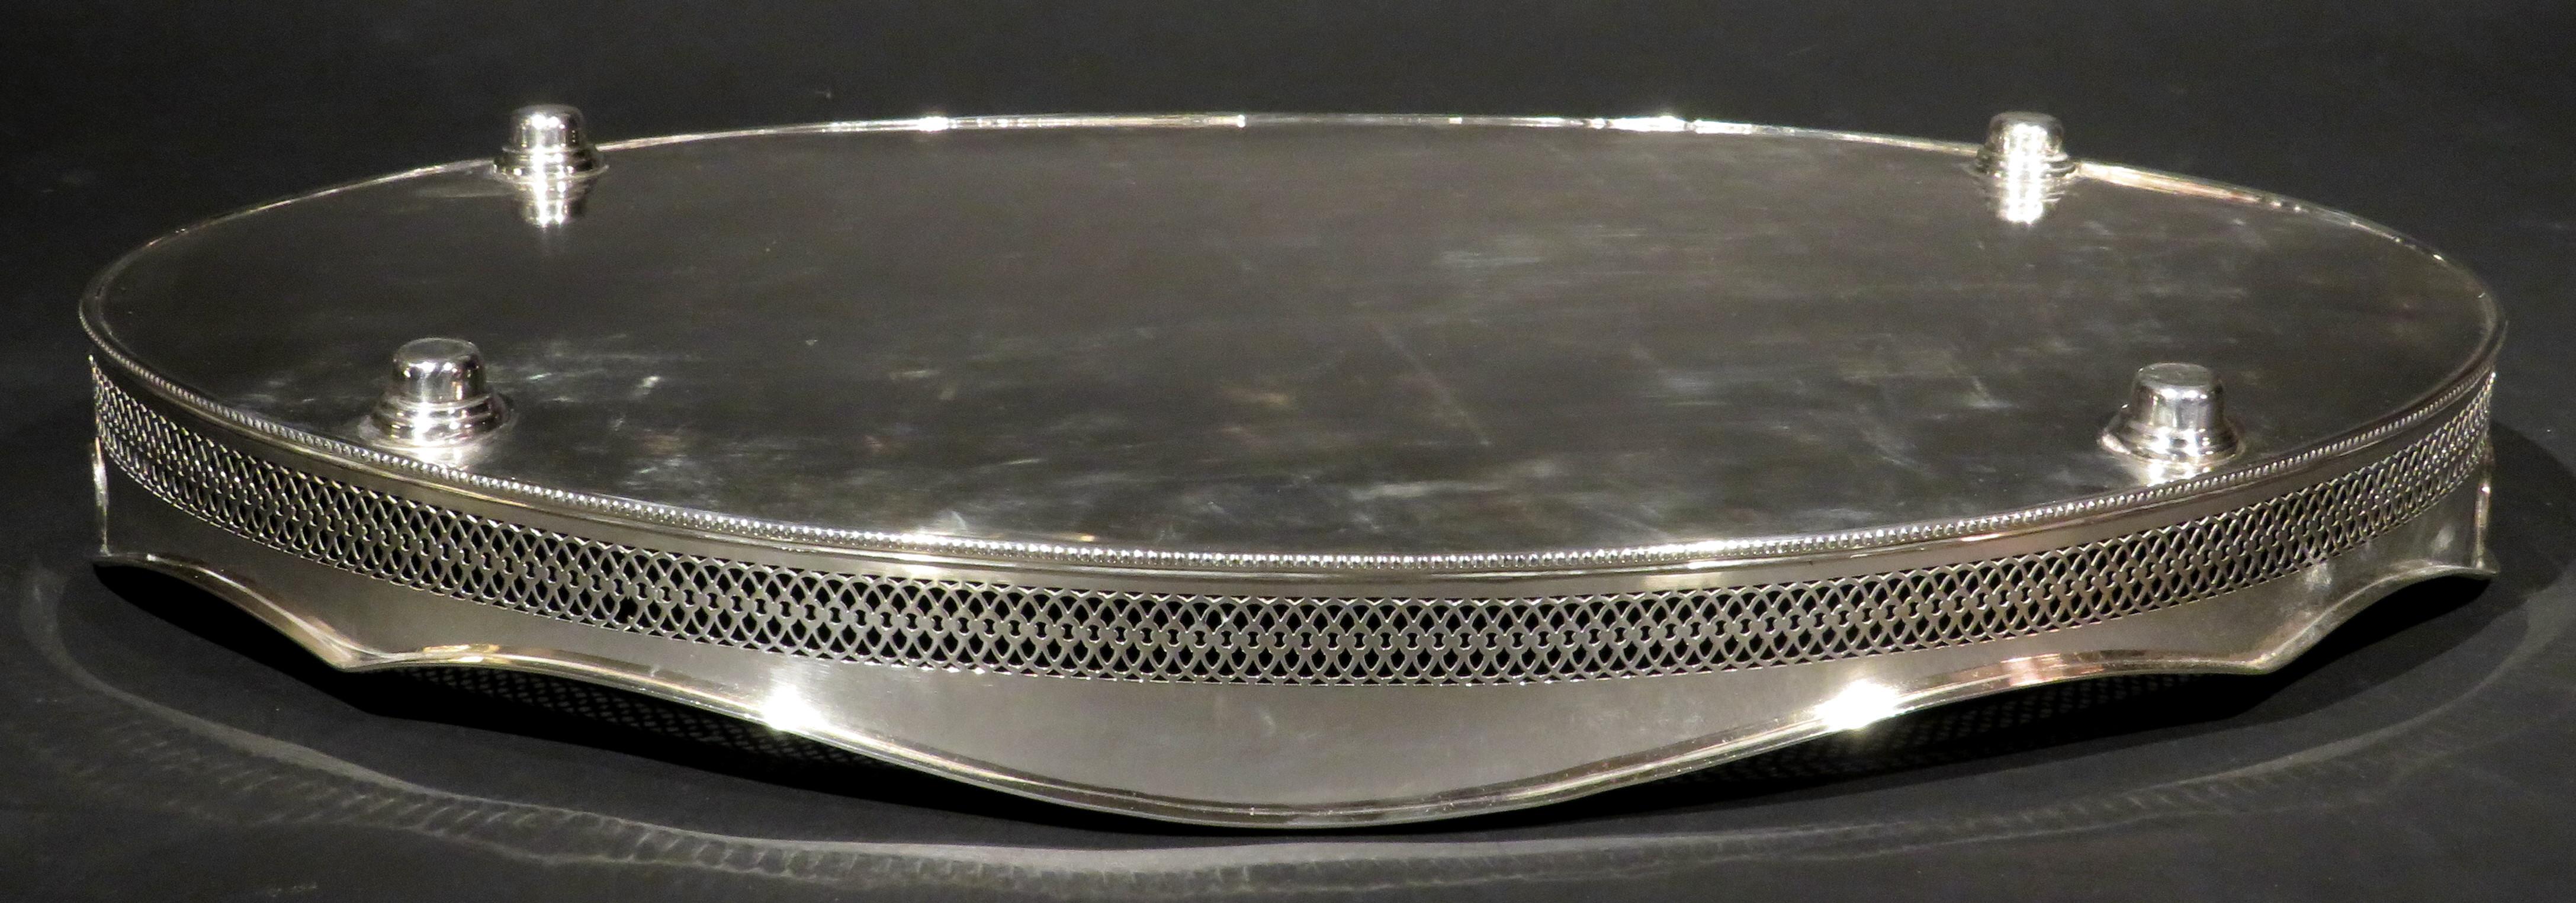 A Very Large Silver Plated Drinks Tray / Serving Tray, England Circa 1930 1